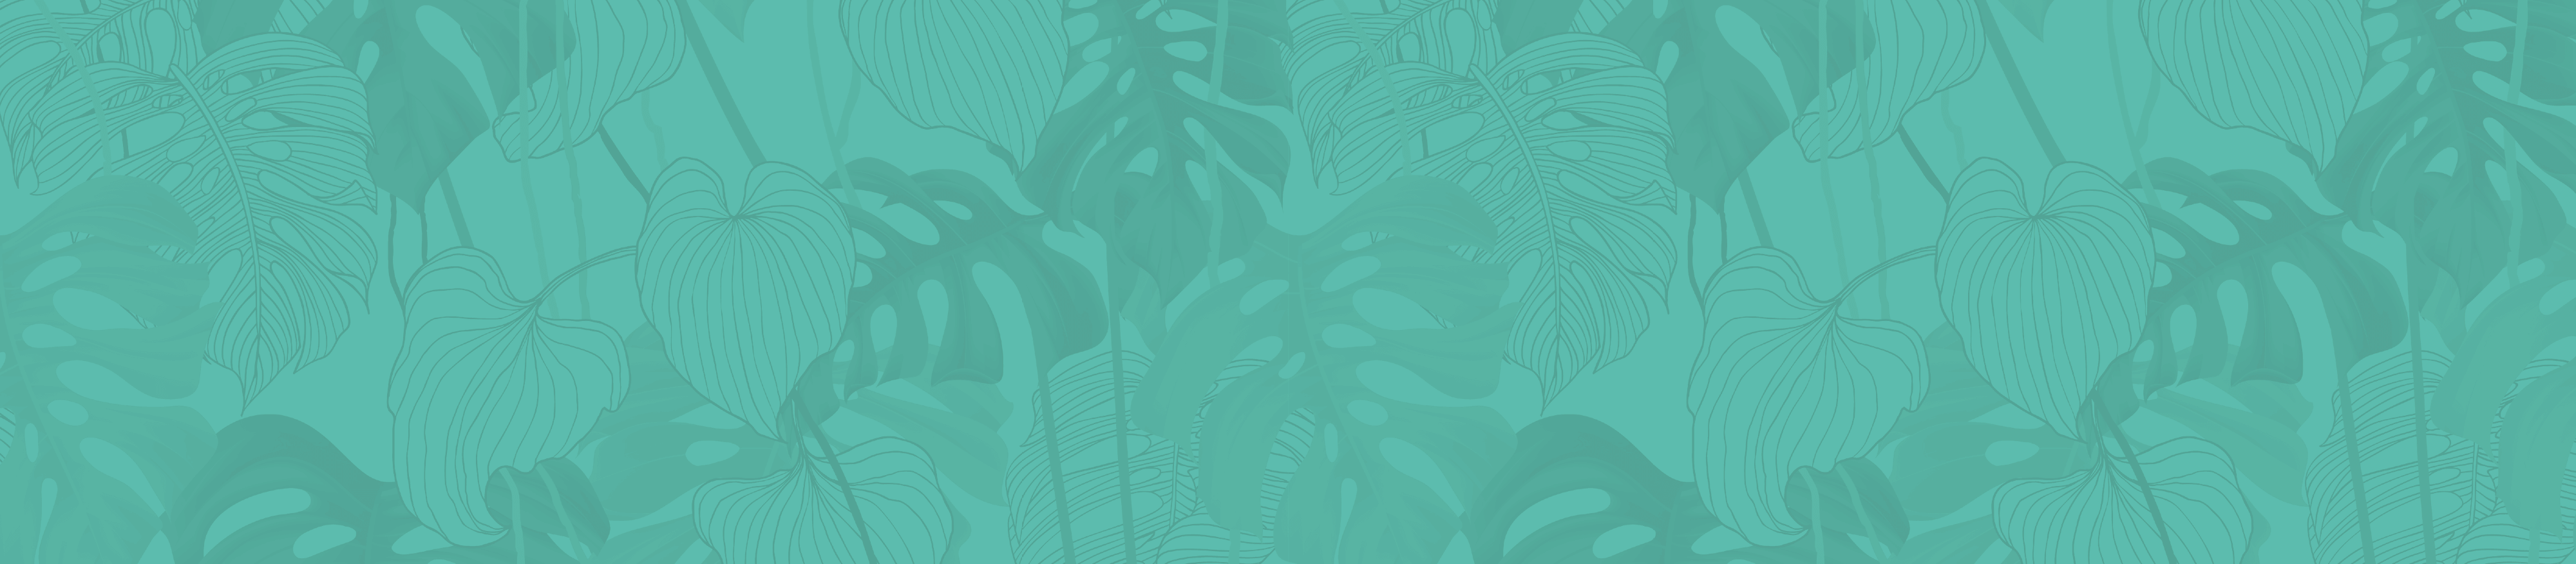 Faded floral pattern on green background (image)